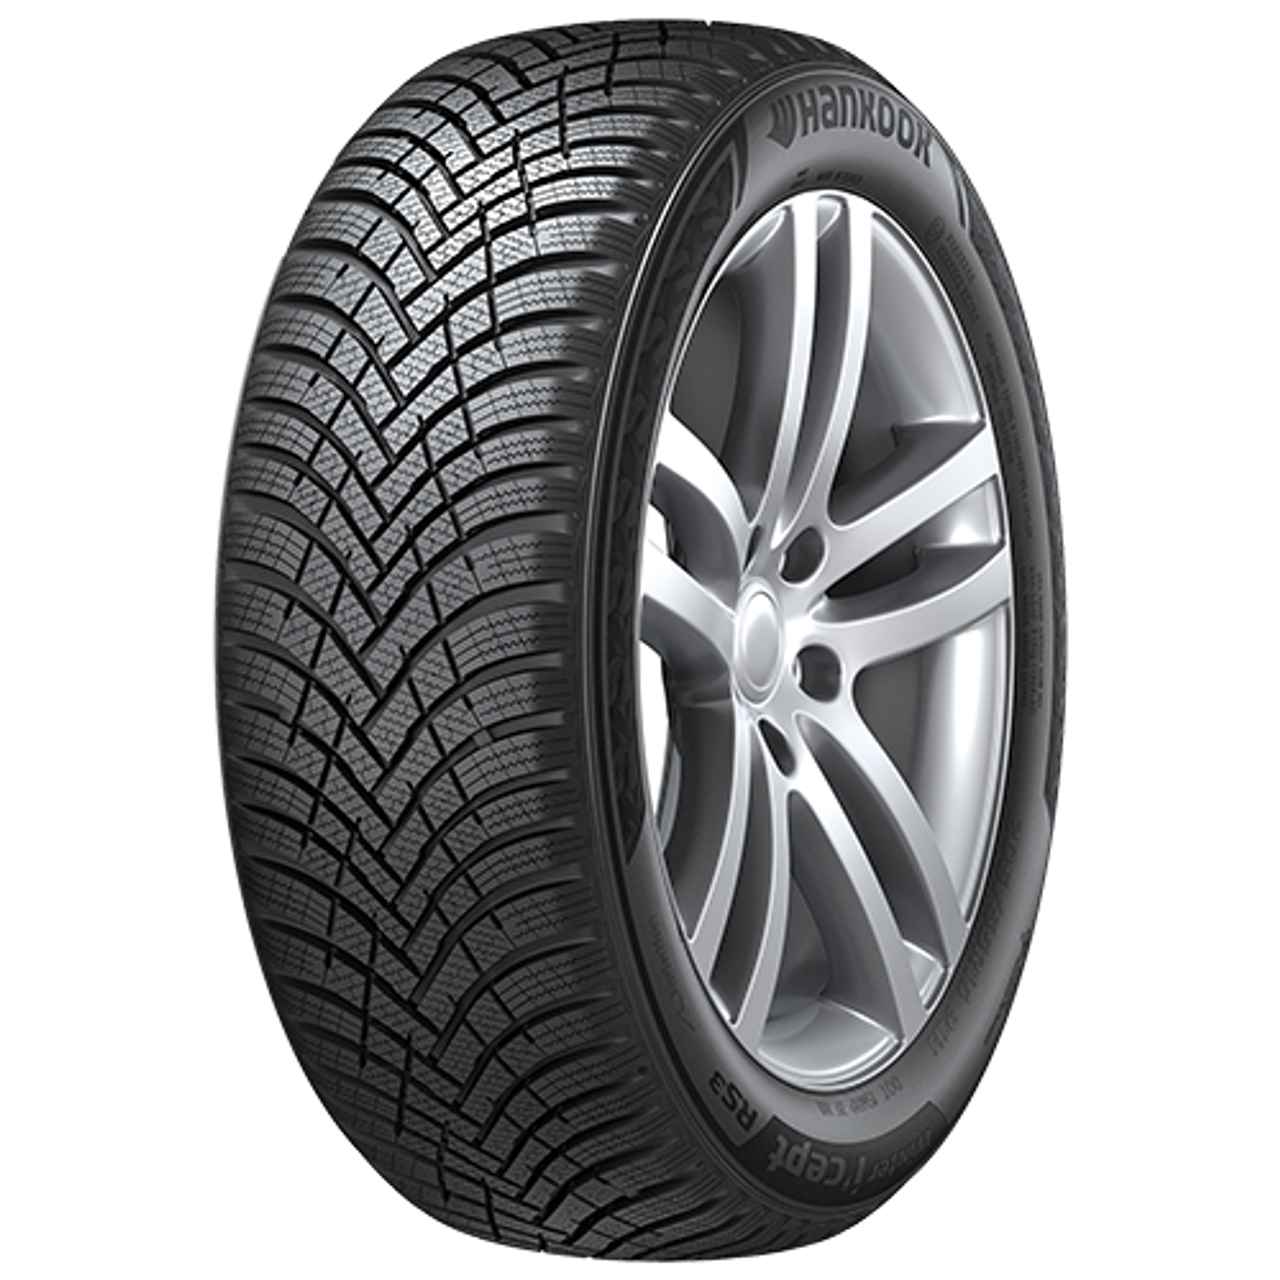 HANKOOK WINTER I*CEPT RS3 225/55R17 97H BSW